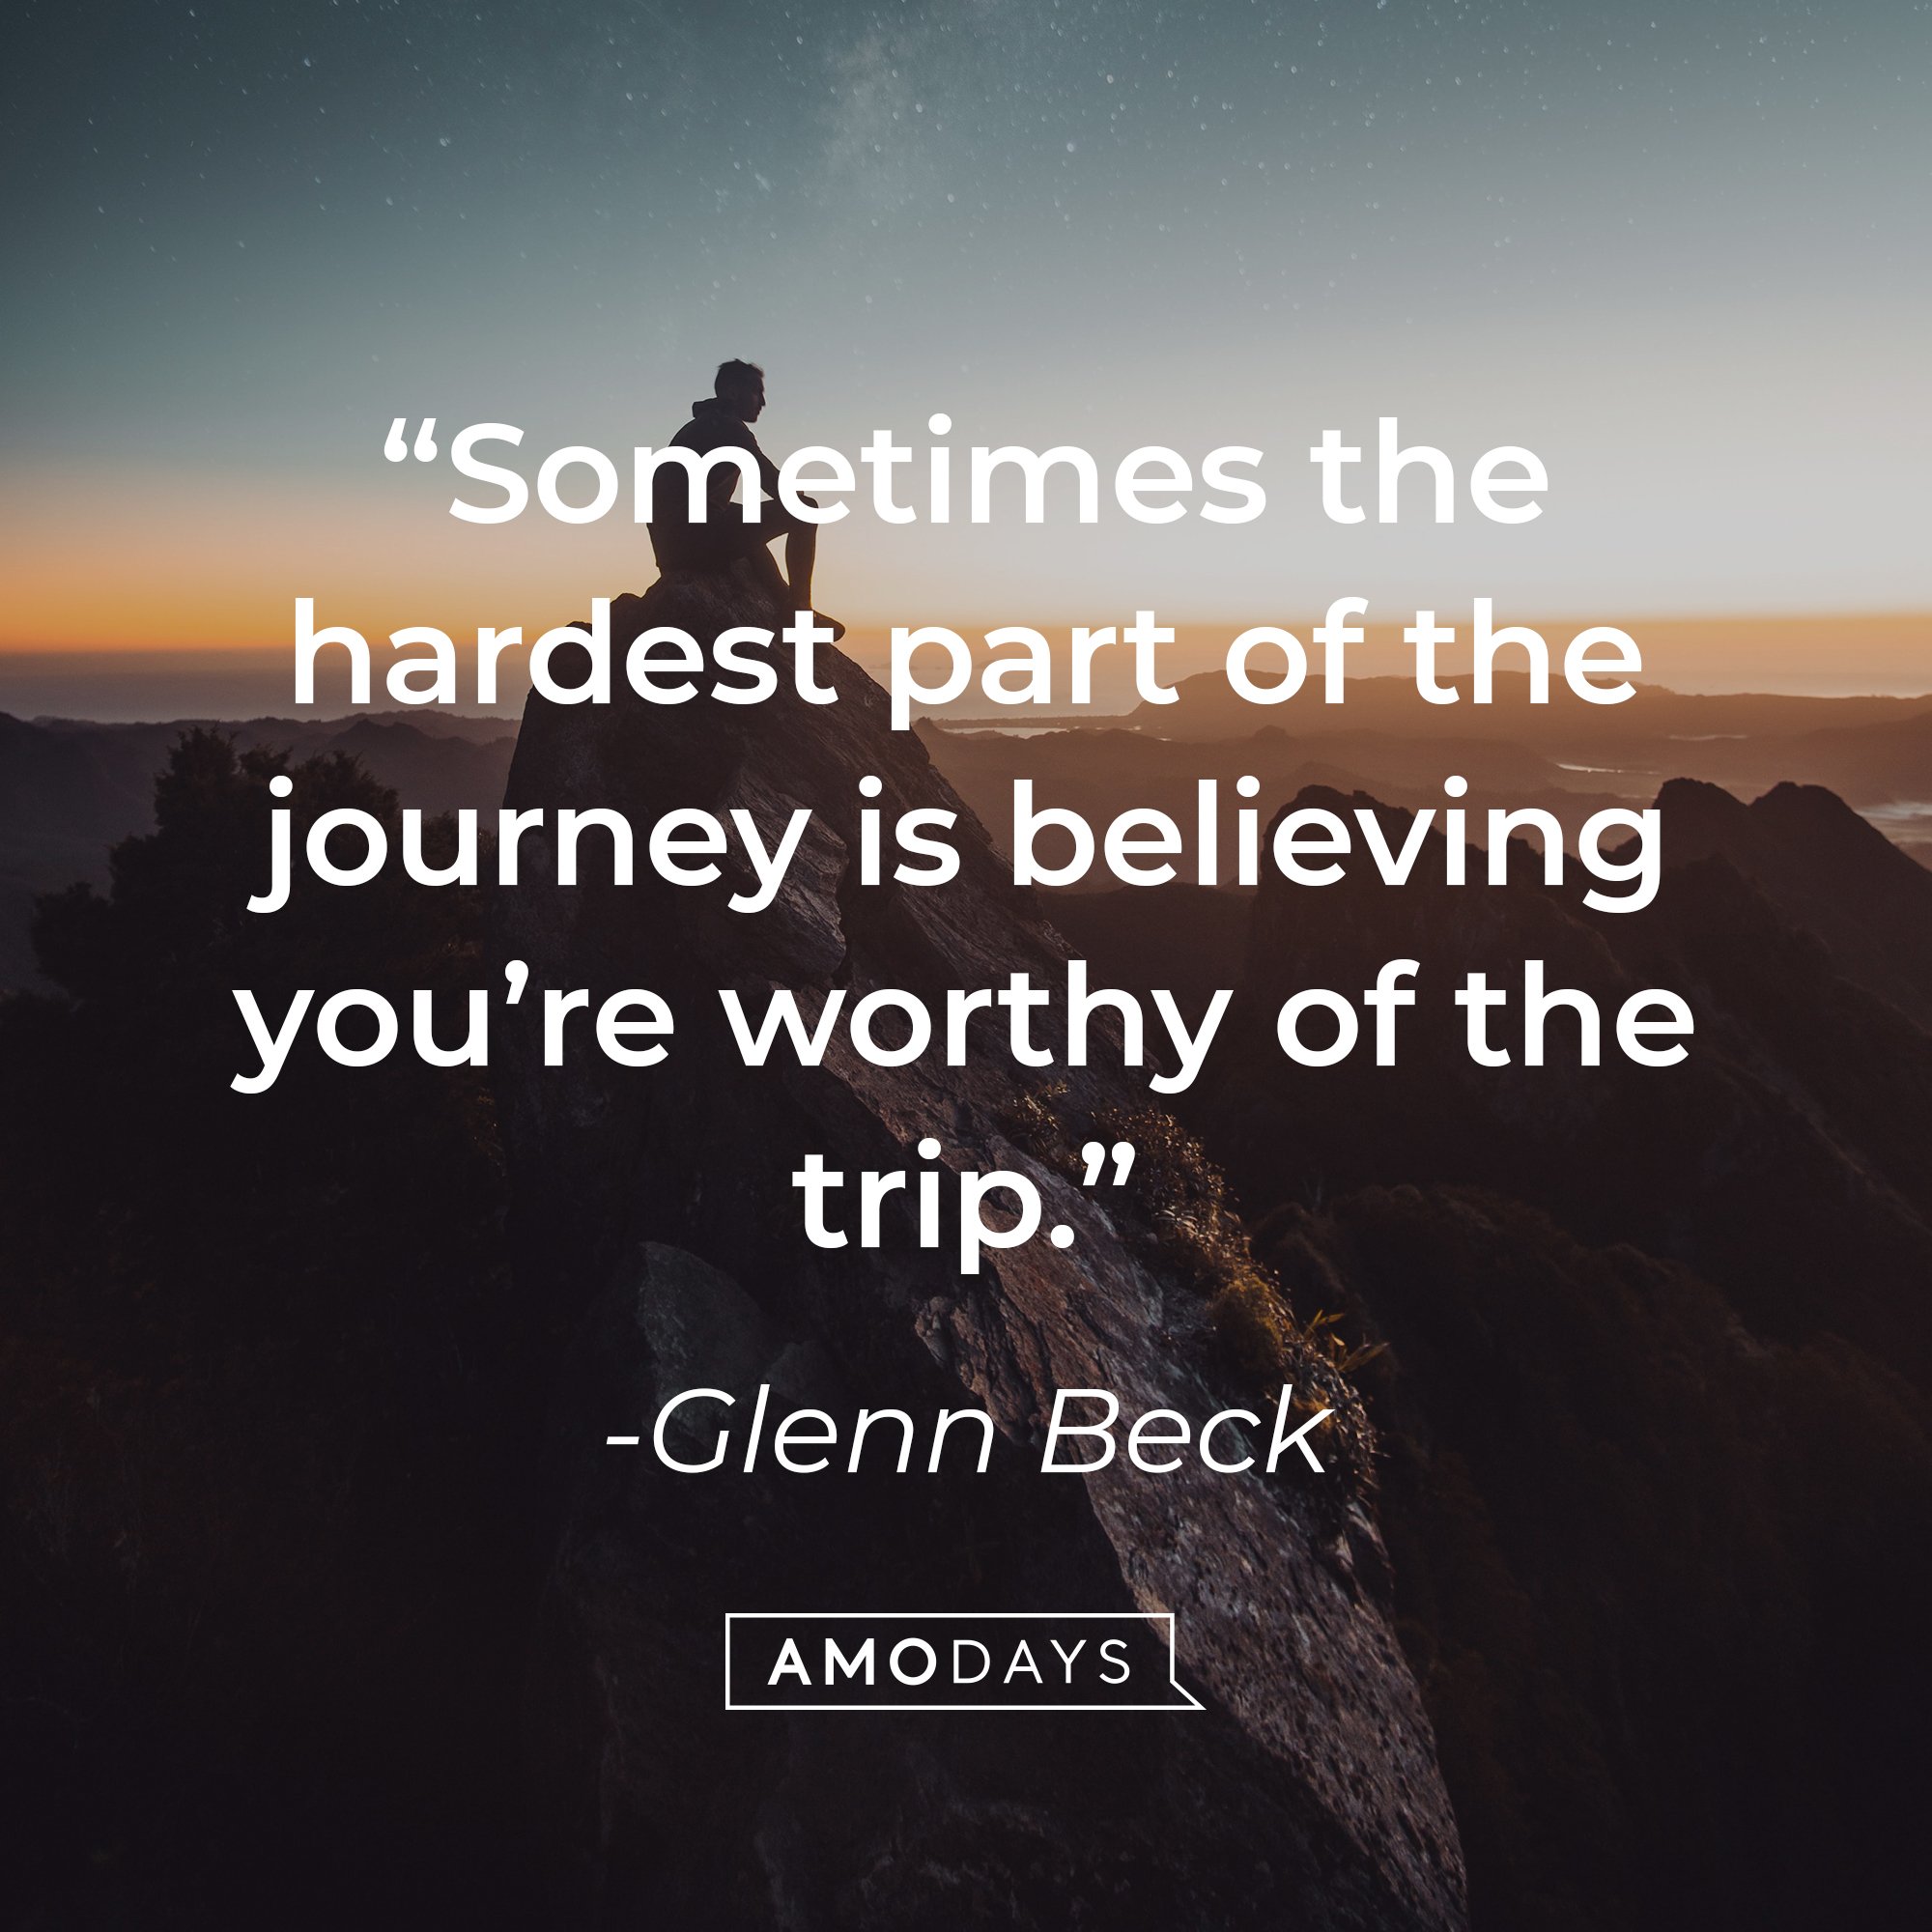 Glenn Beck's quote: “Sometimes the hardest part of the journey is believing you’re worthy of the trip.” | Image: AmoDays